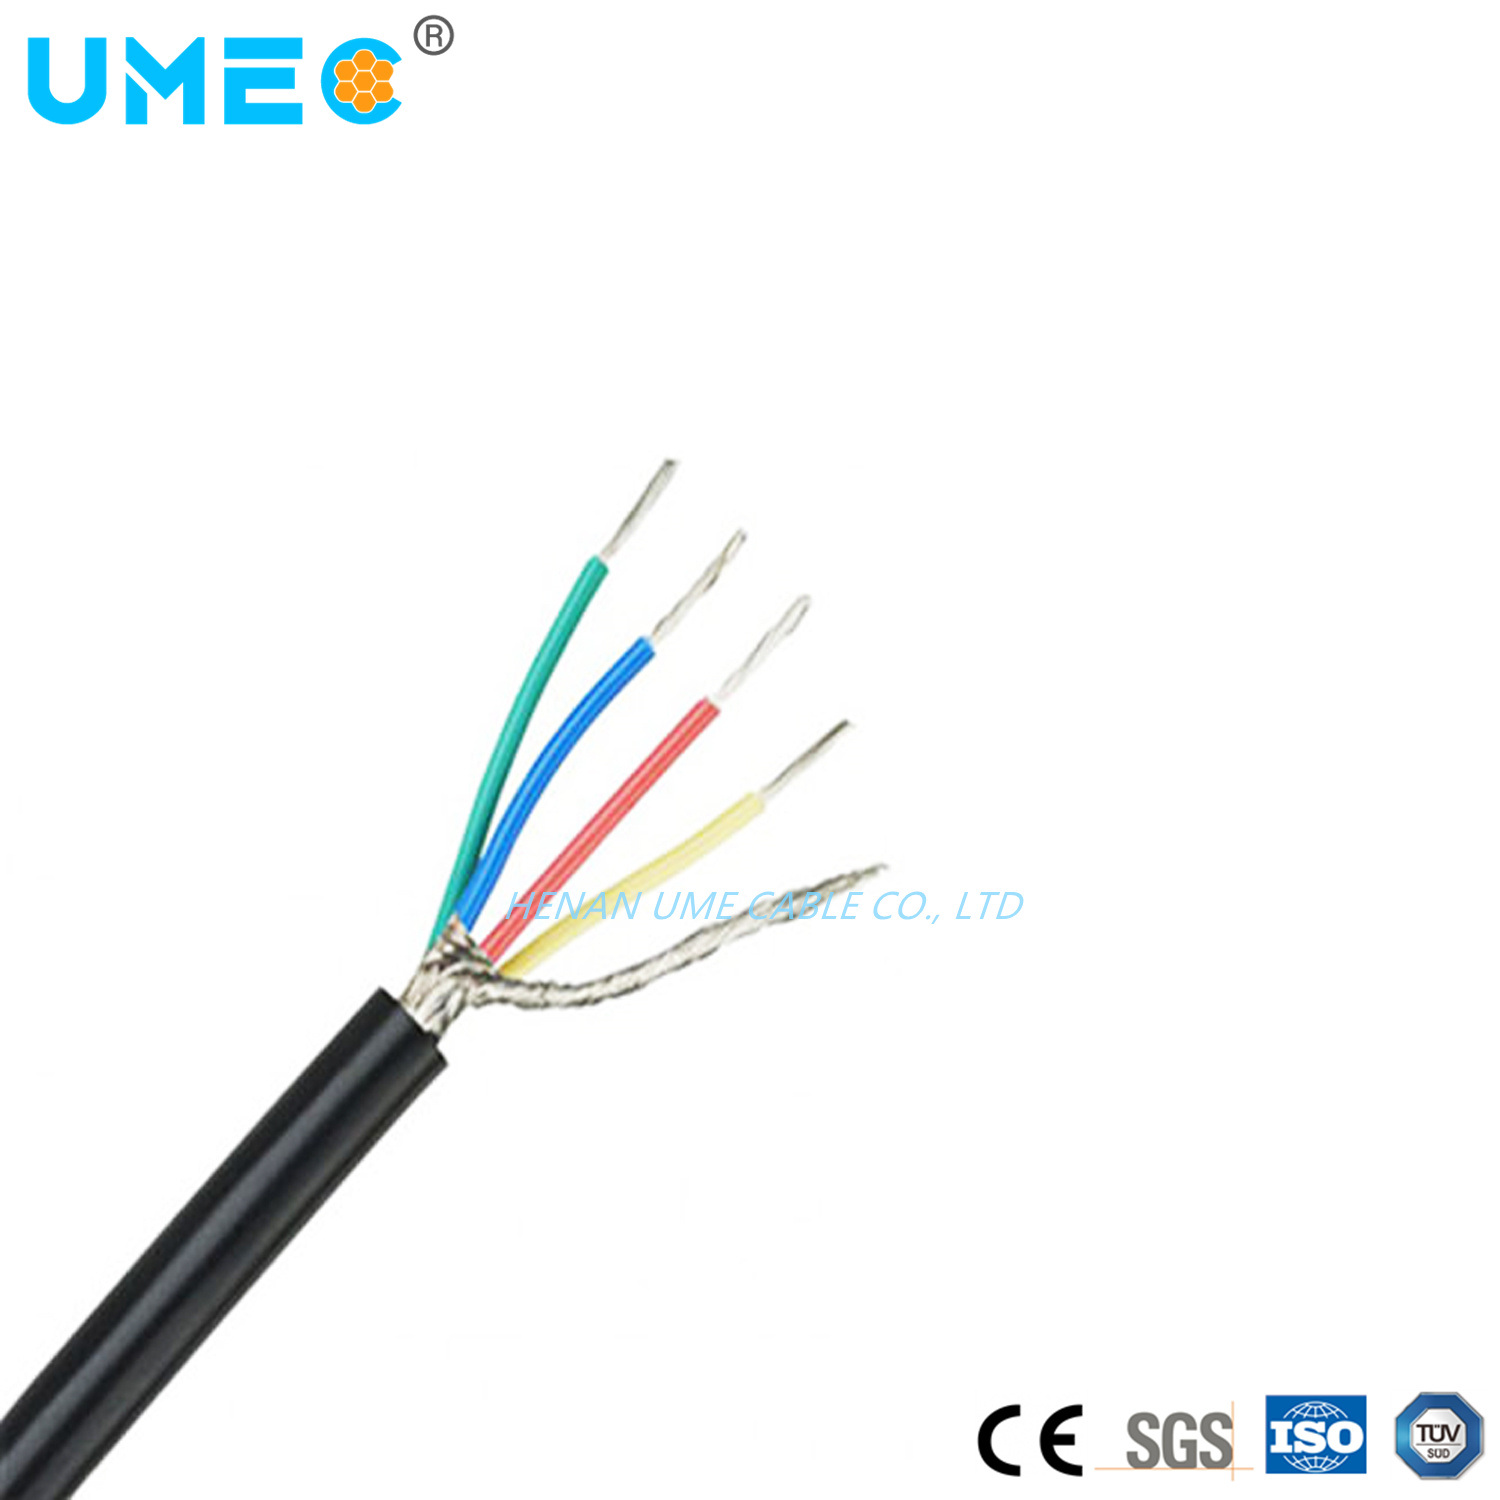 Widely Used Superior Quality Computer Cable Class5 Stranded Fine Bare Copper Wire Conductor Blue Black Instrument Computer Cable Wire